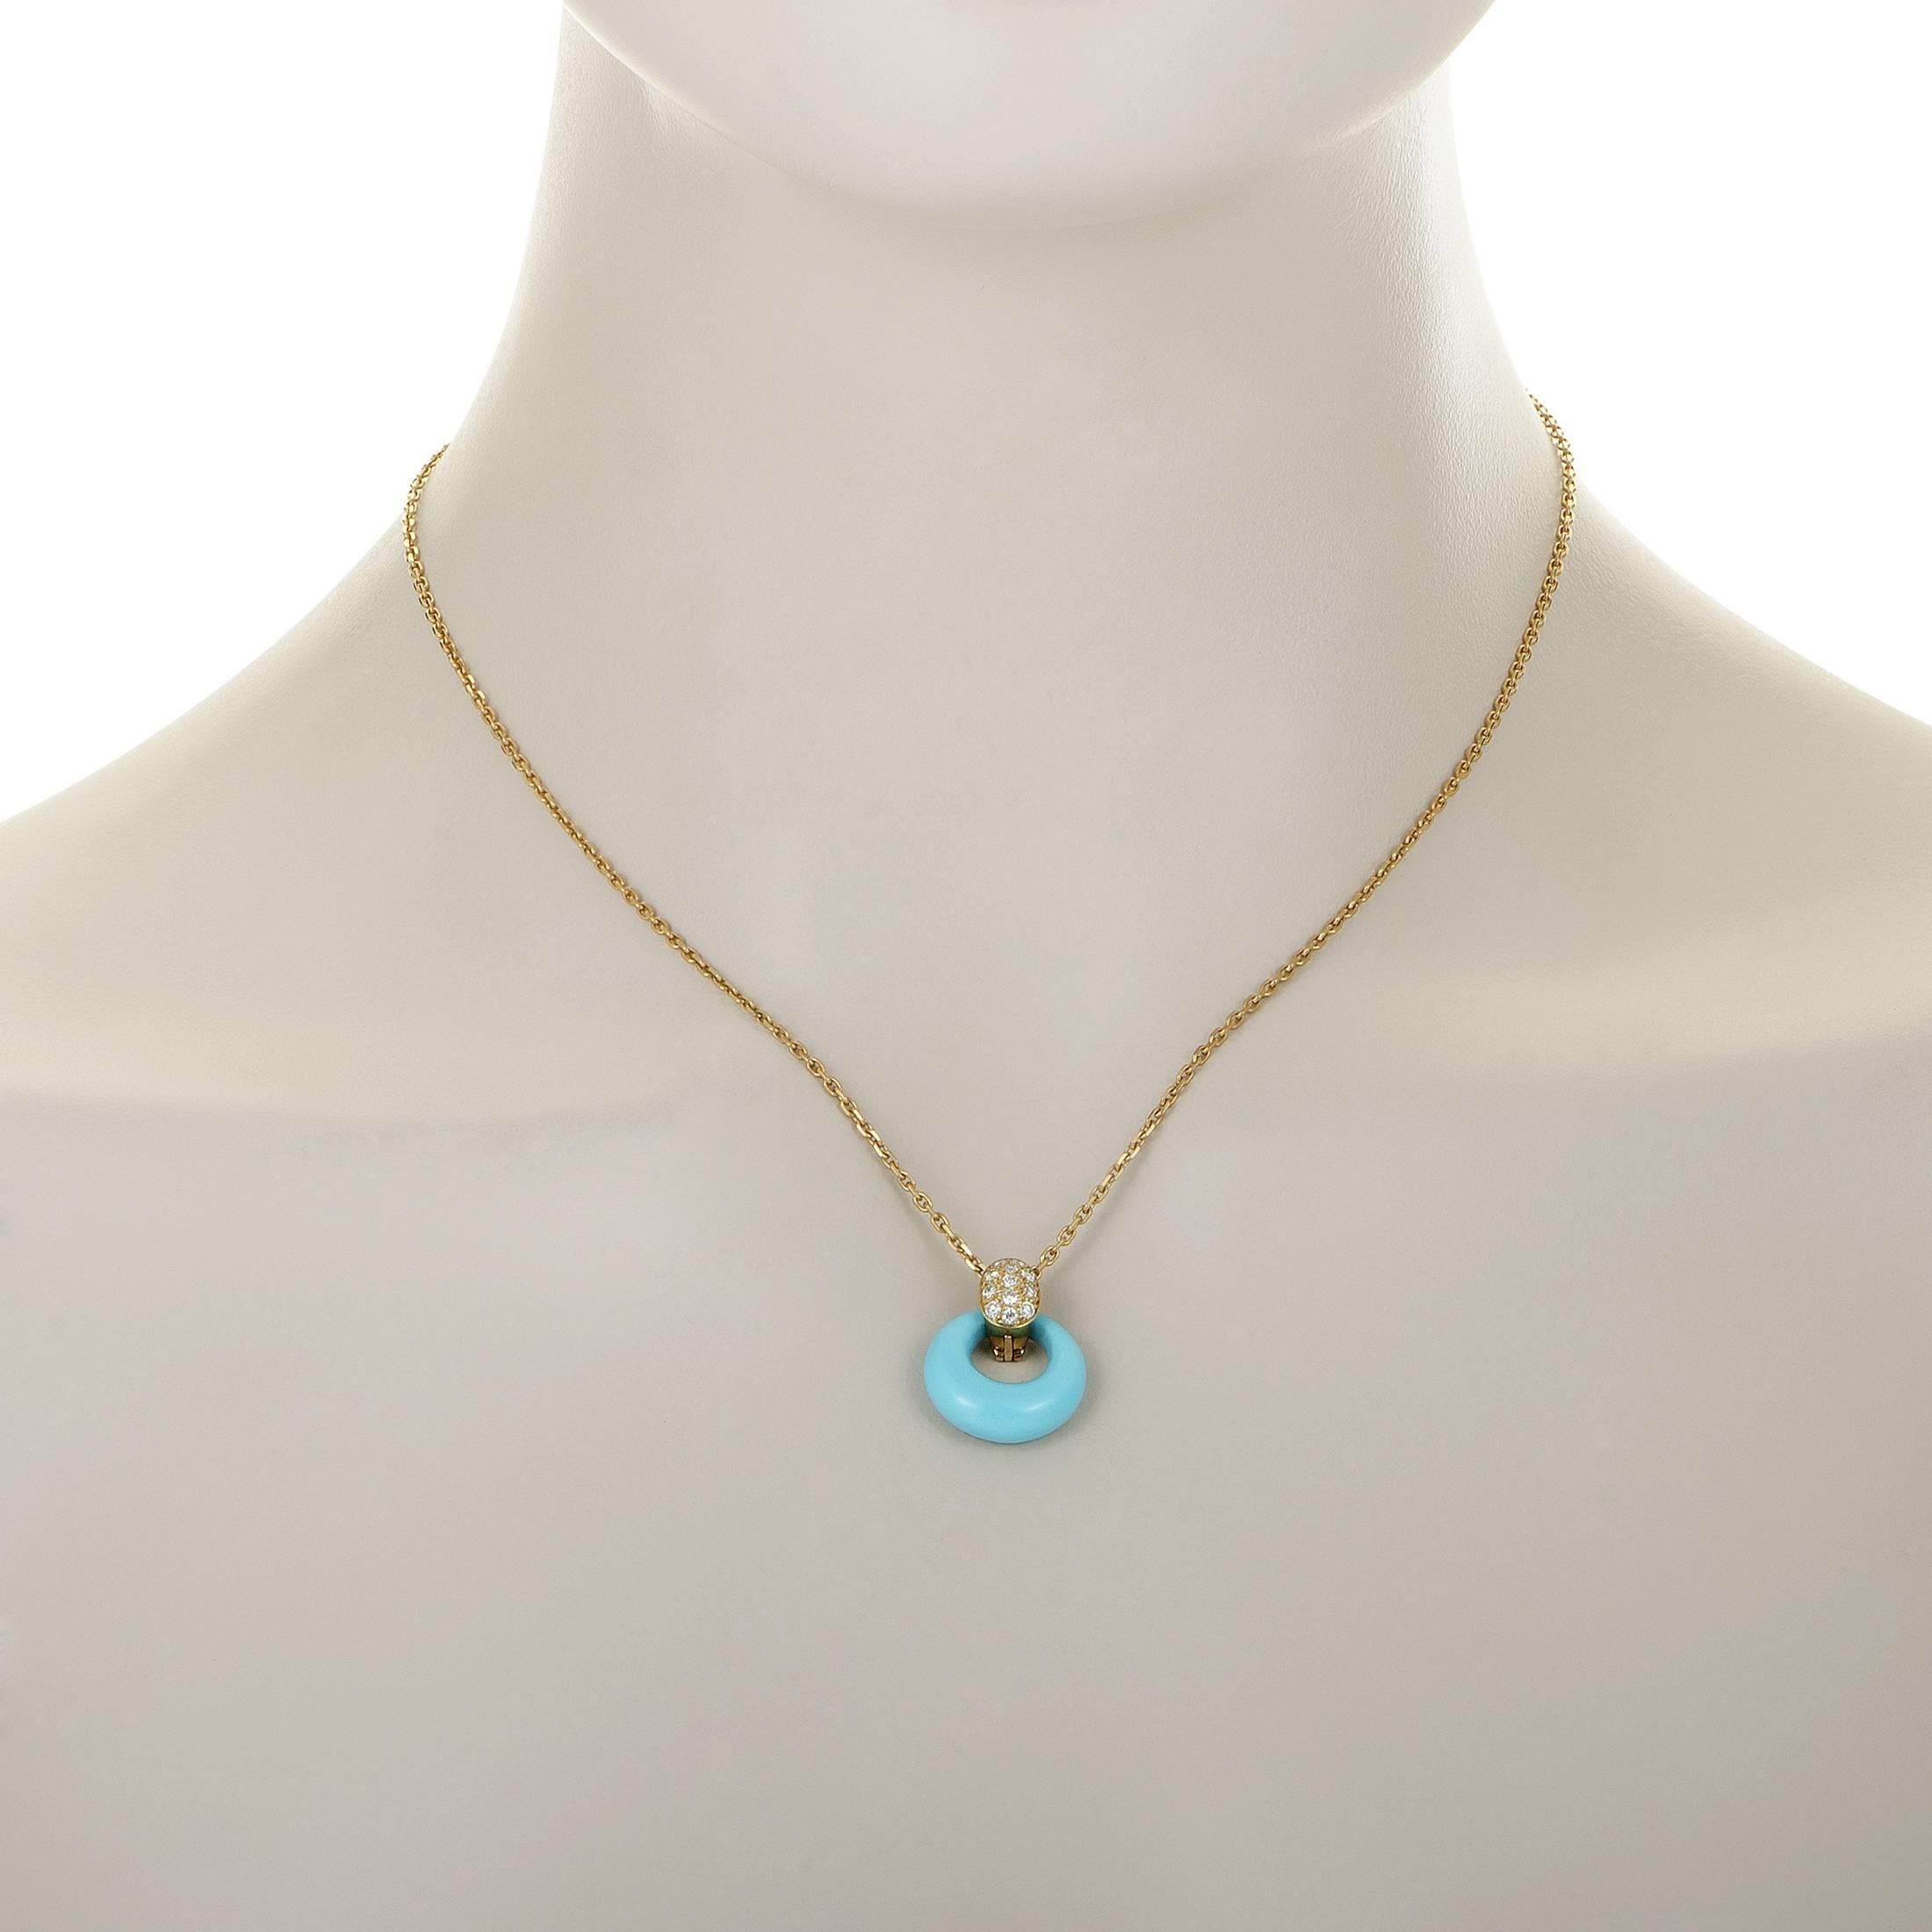 The charming blend of radiant 18K yellow gold and precious diamonds weighing in total 0.25ct is contrasted tastefully by the splendid turquoise stone of a marvelous shape in the pendant of this exceptional necklace from Van Cleef & Arpels.
Pendant